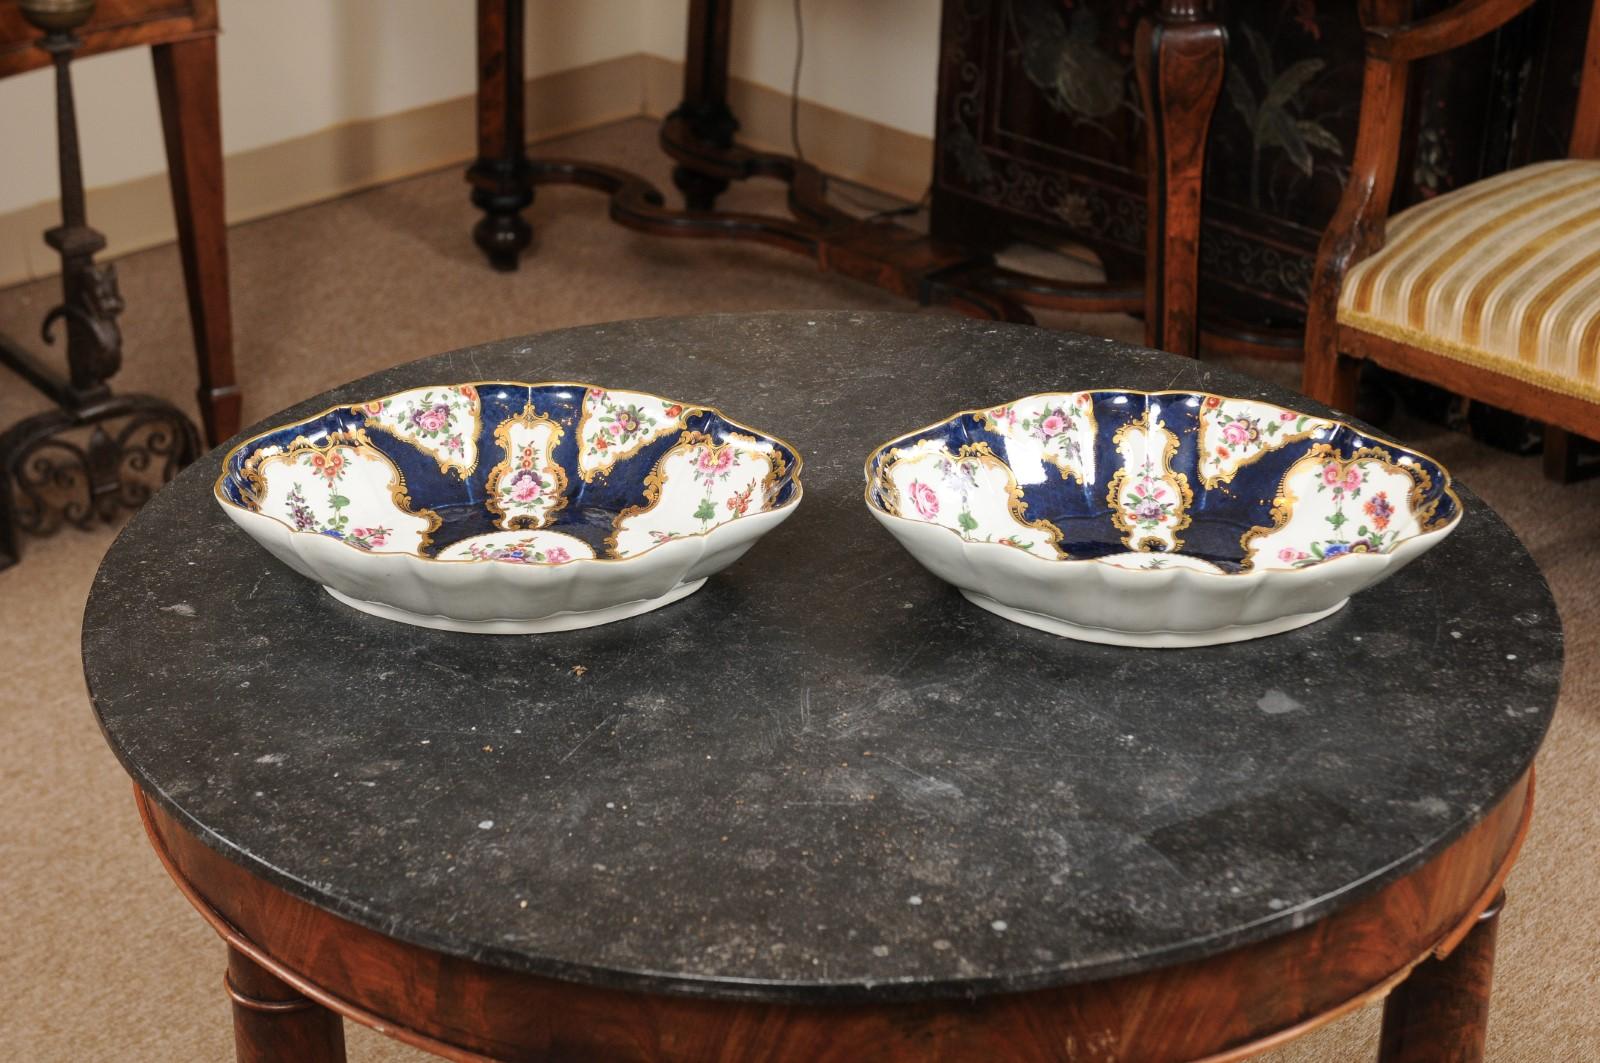 Pair of 18th Century English Worcester Porcelain Serving Dishes, “Dr. Wall” For Sale 3